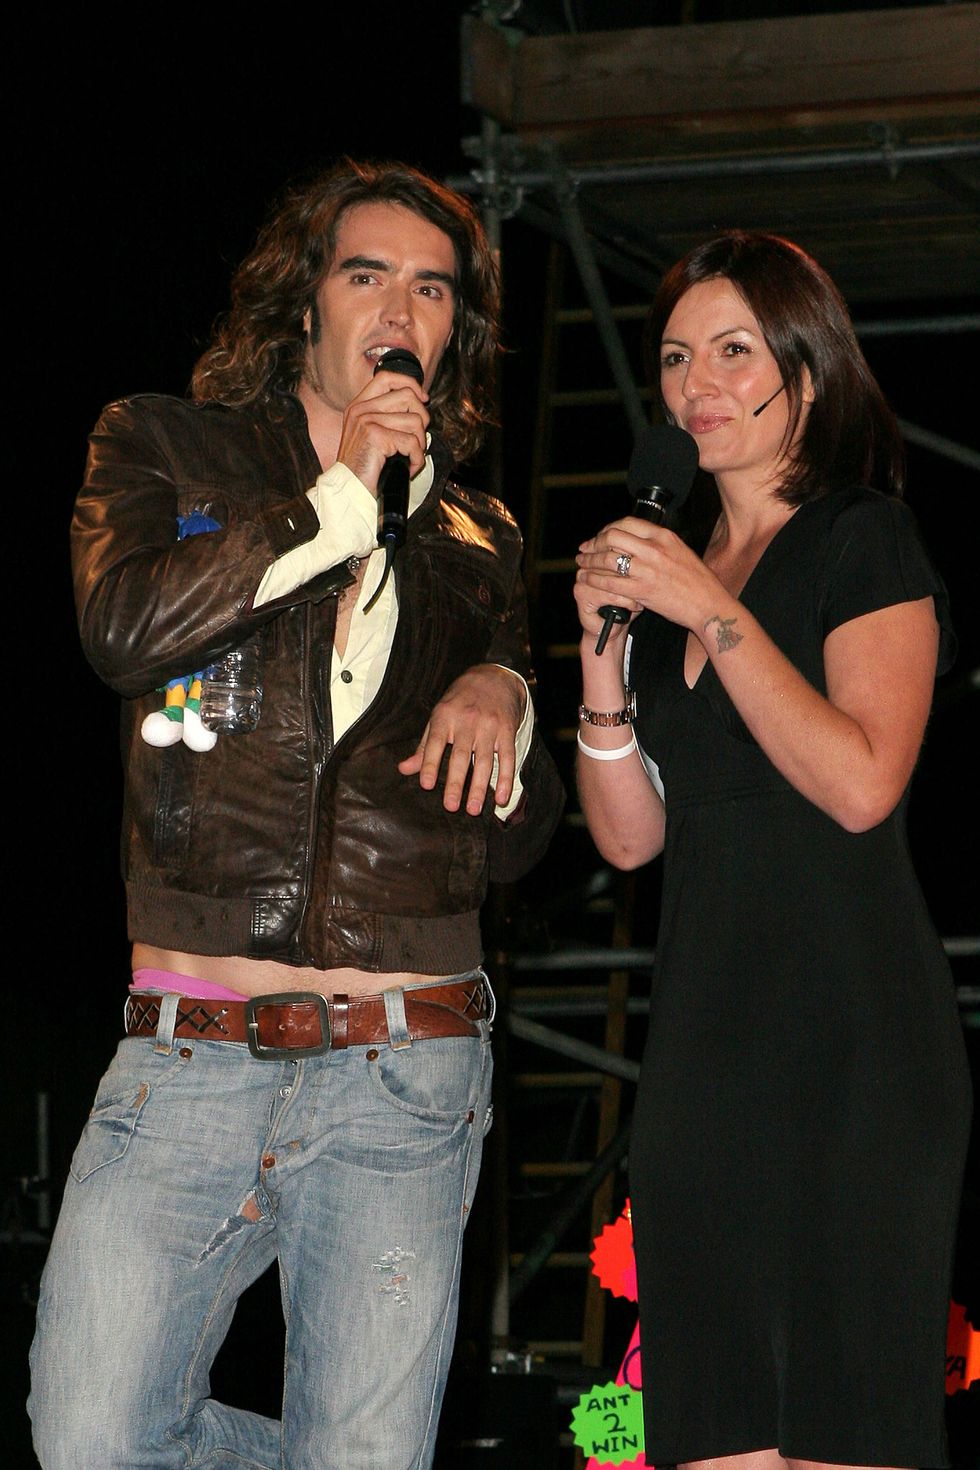 russell brand on stage with big ﻿brother host, davina mccall, at a live eviction in 2005